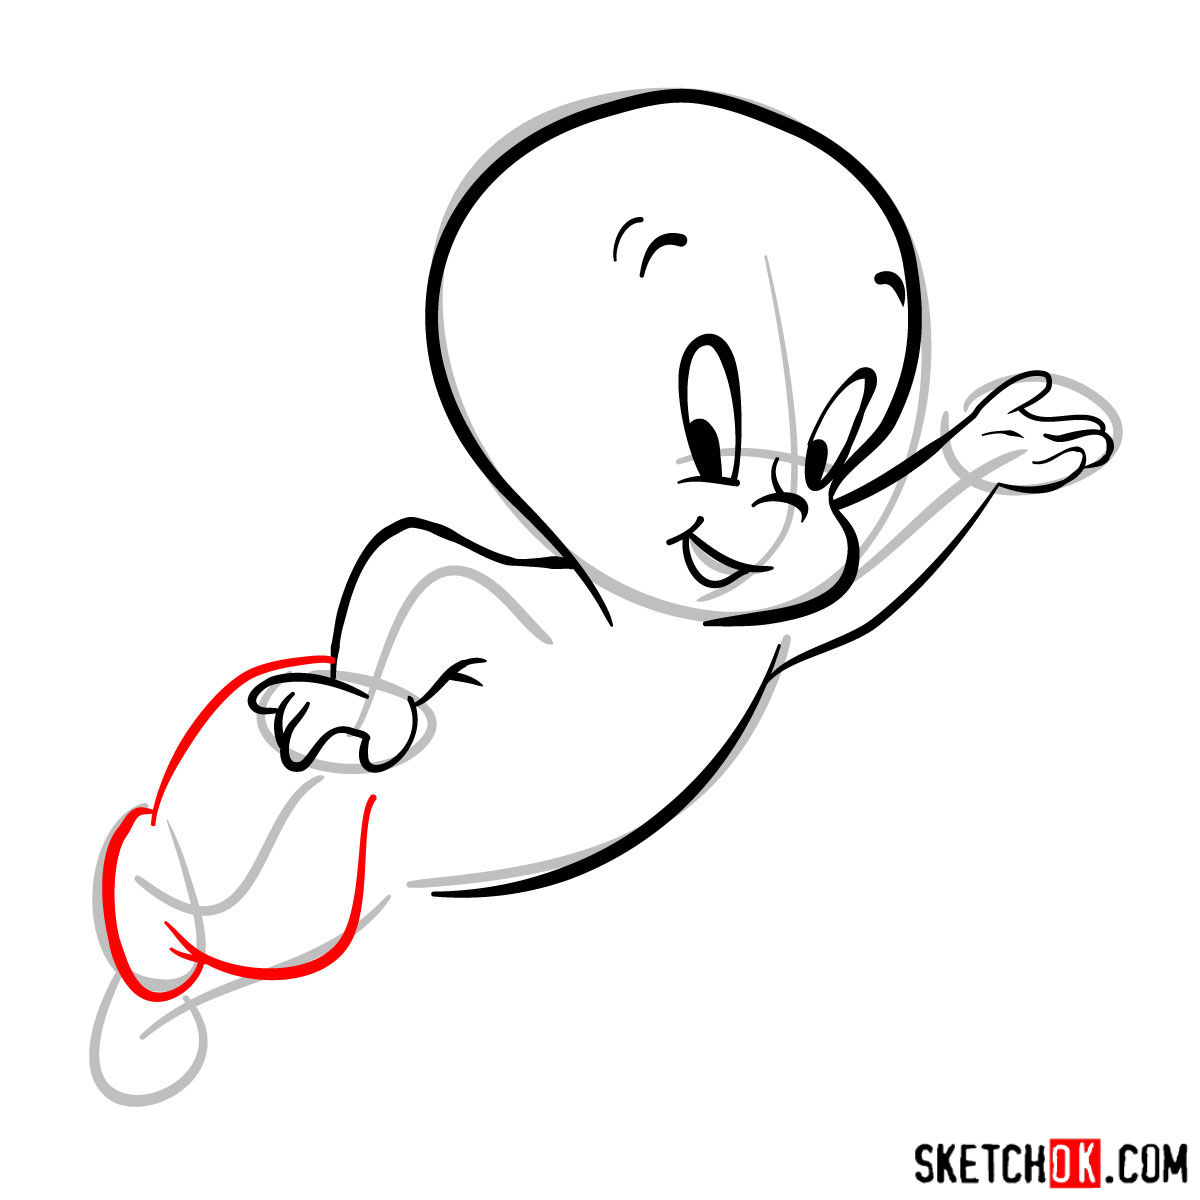 How to draw Casper the Friendly Ghost - step 08